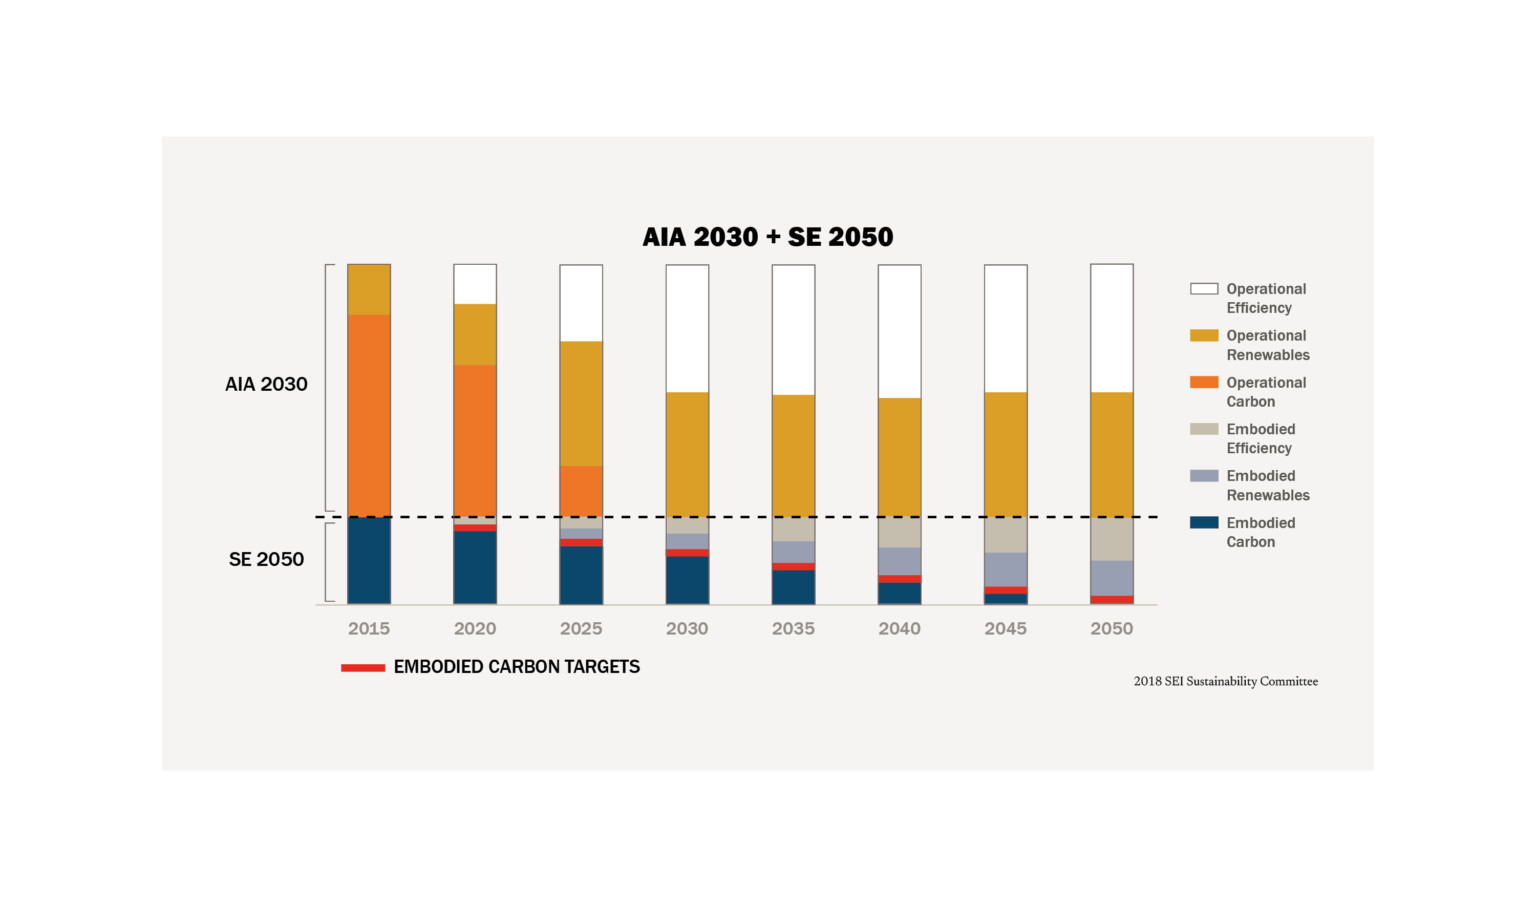 bar chart showing aia 2030 and se 2050 embodied carbon targets